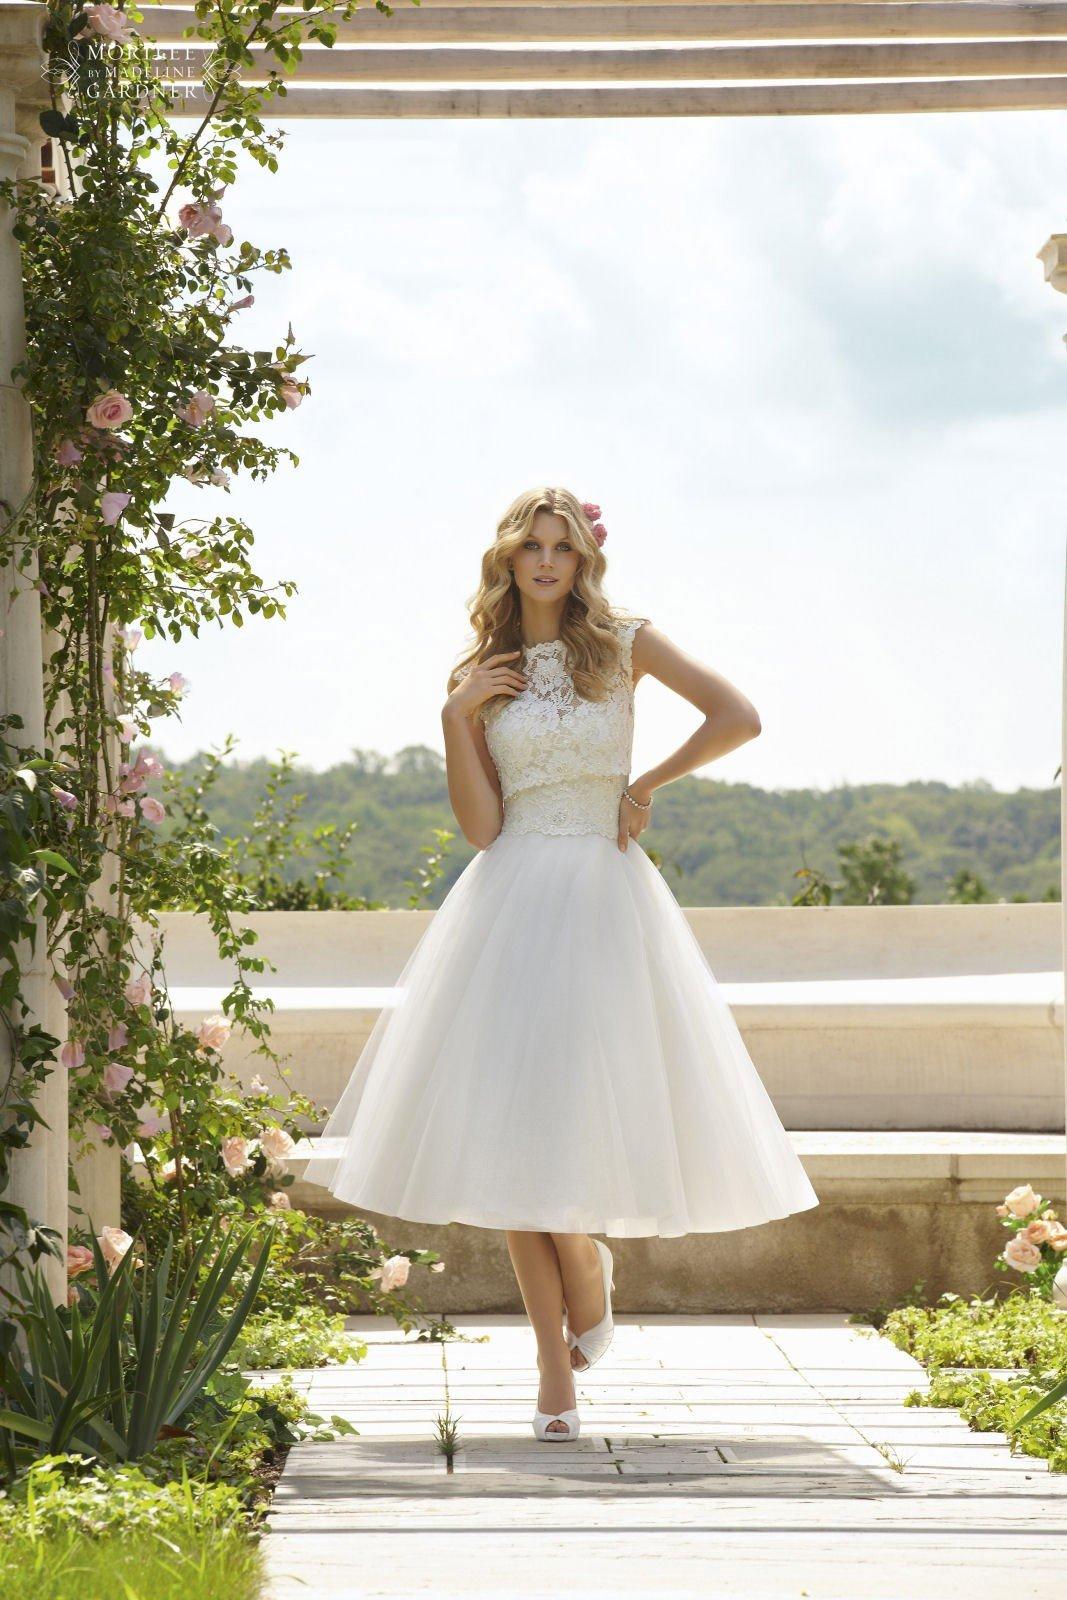 Our Favourite 1950s Inspired Wedding Dresses - hitched.co.uk